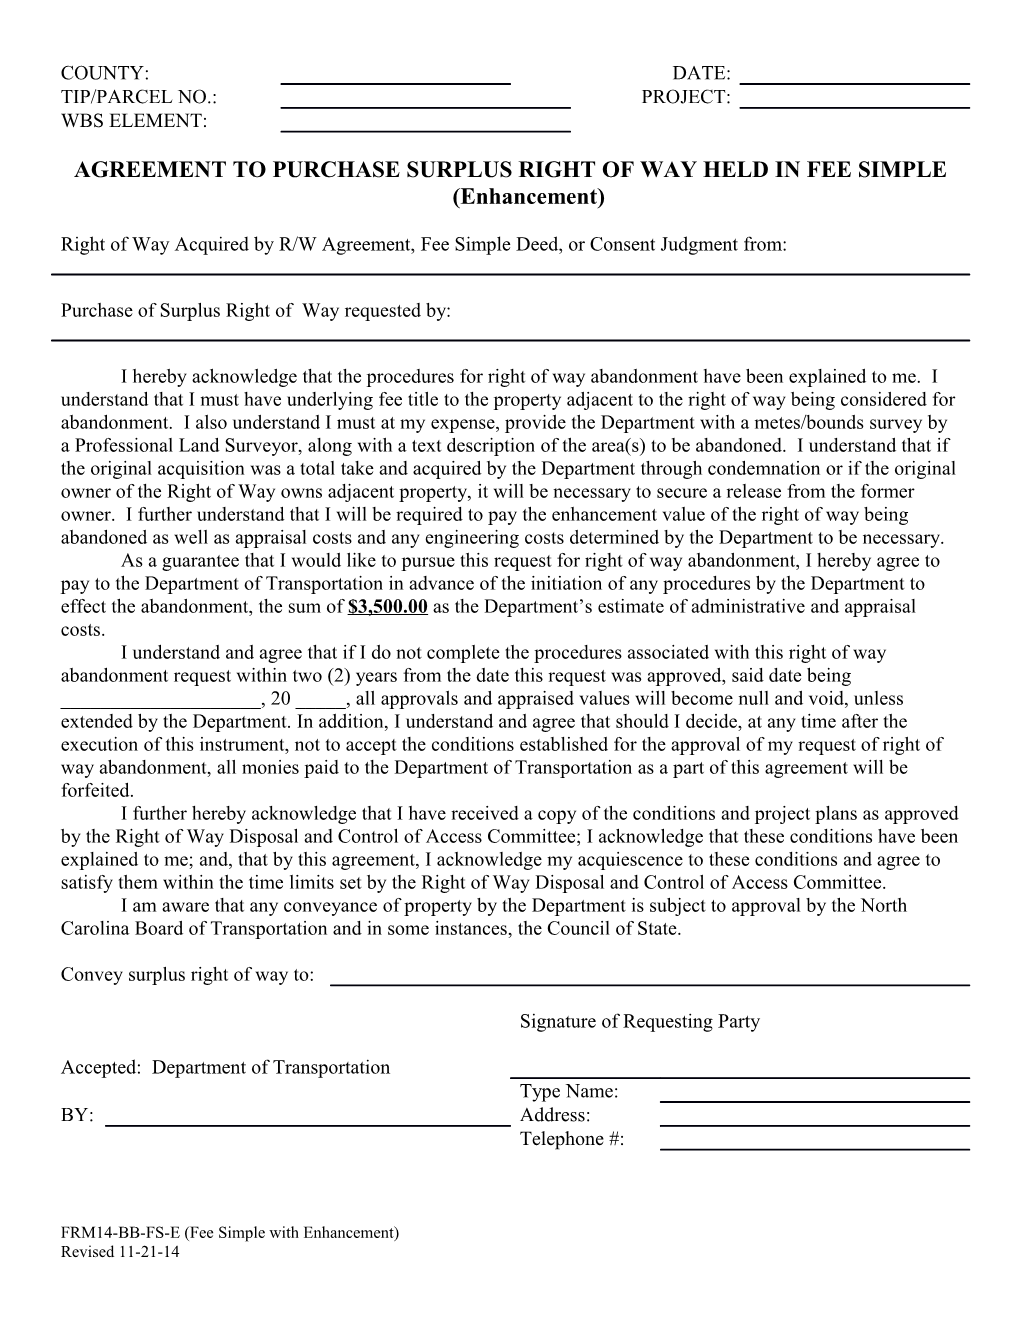 Agreement to Purchase Surplus Right of Way (Fee Simple) with Enhancement